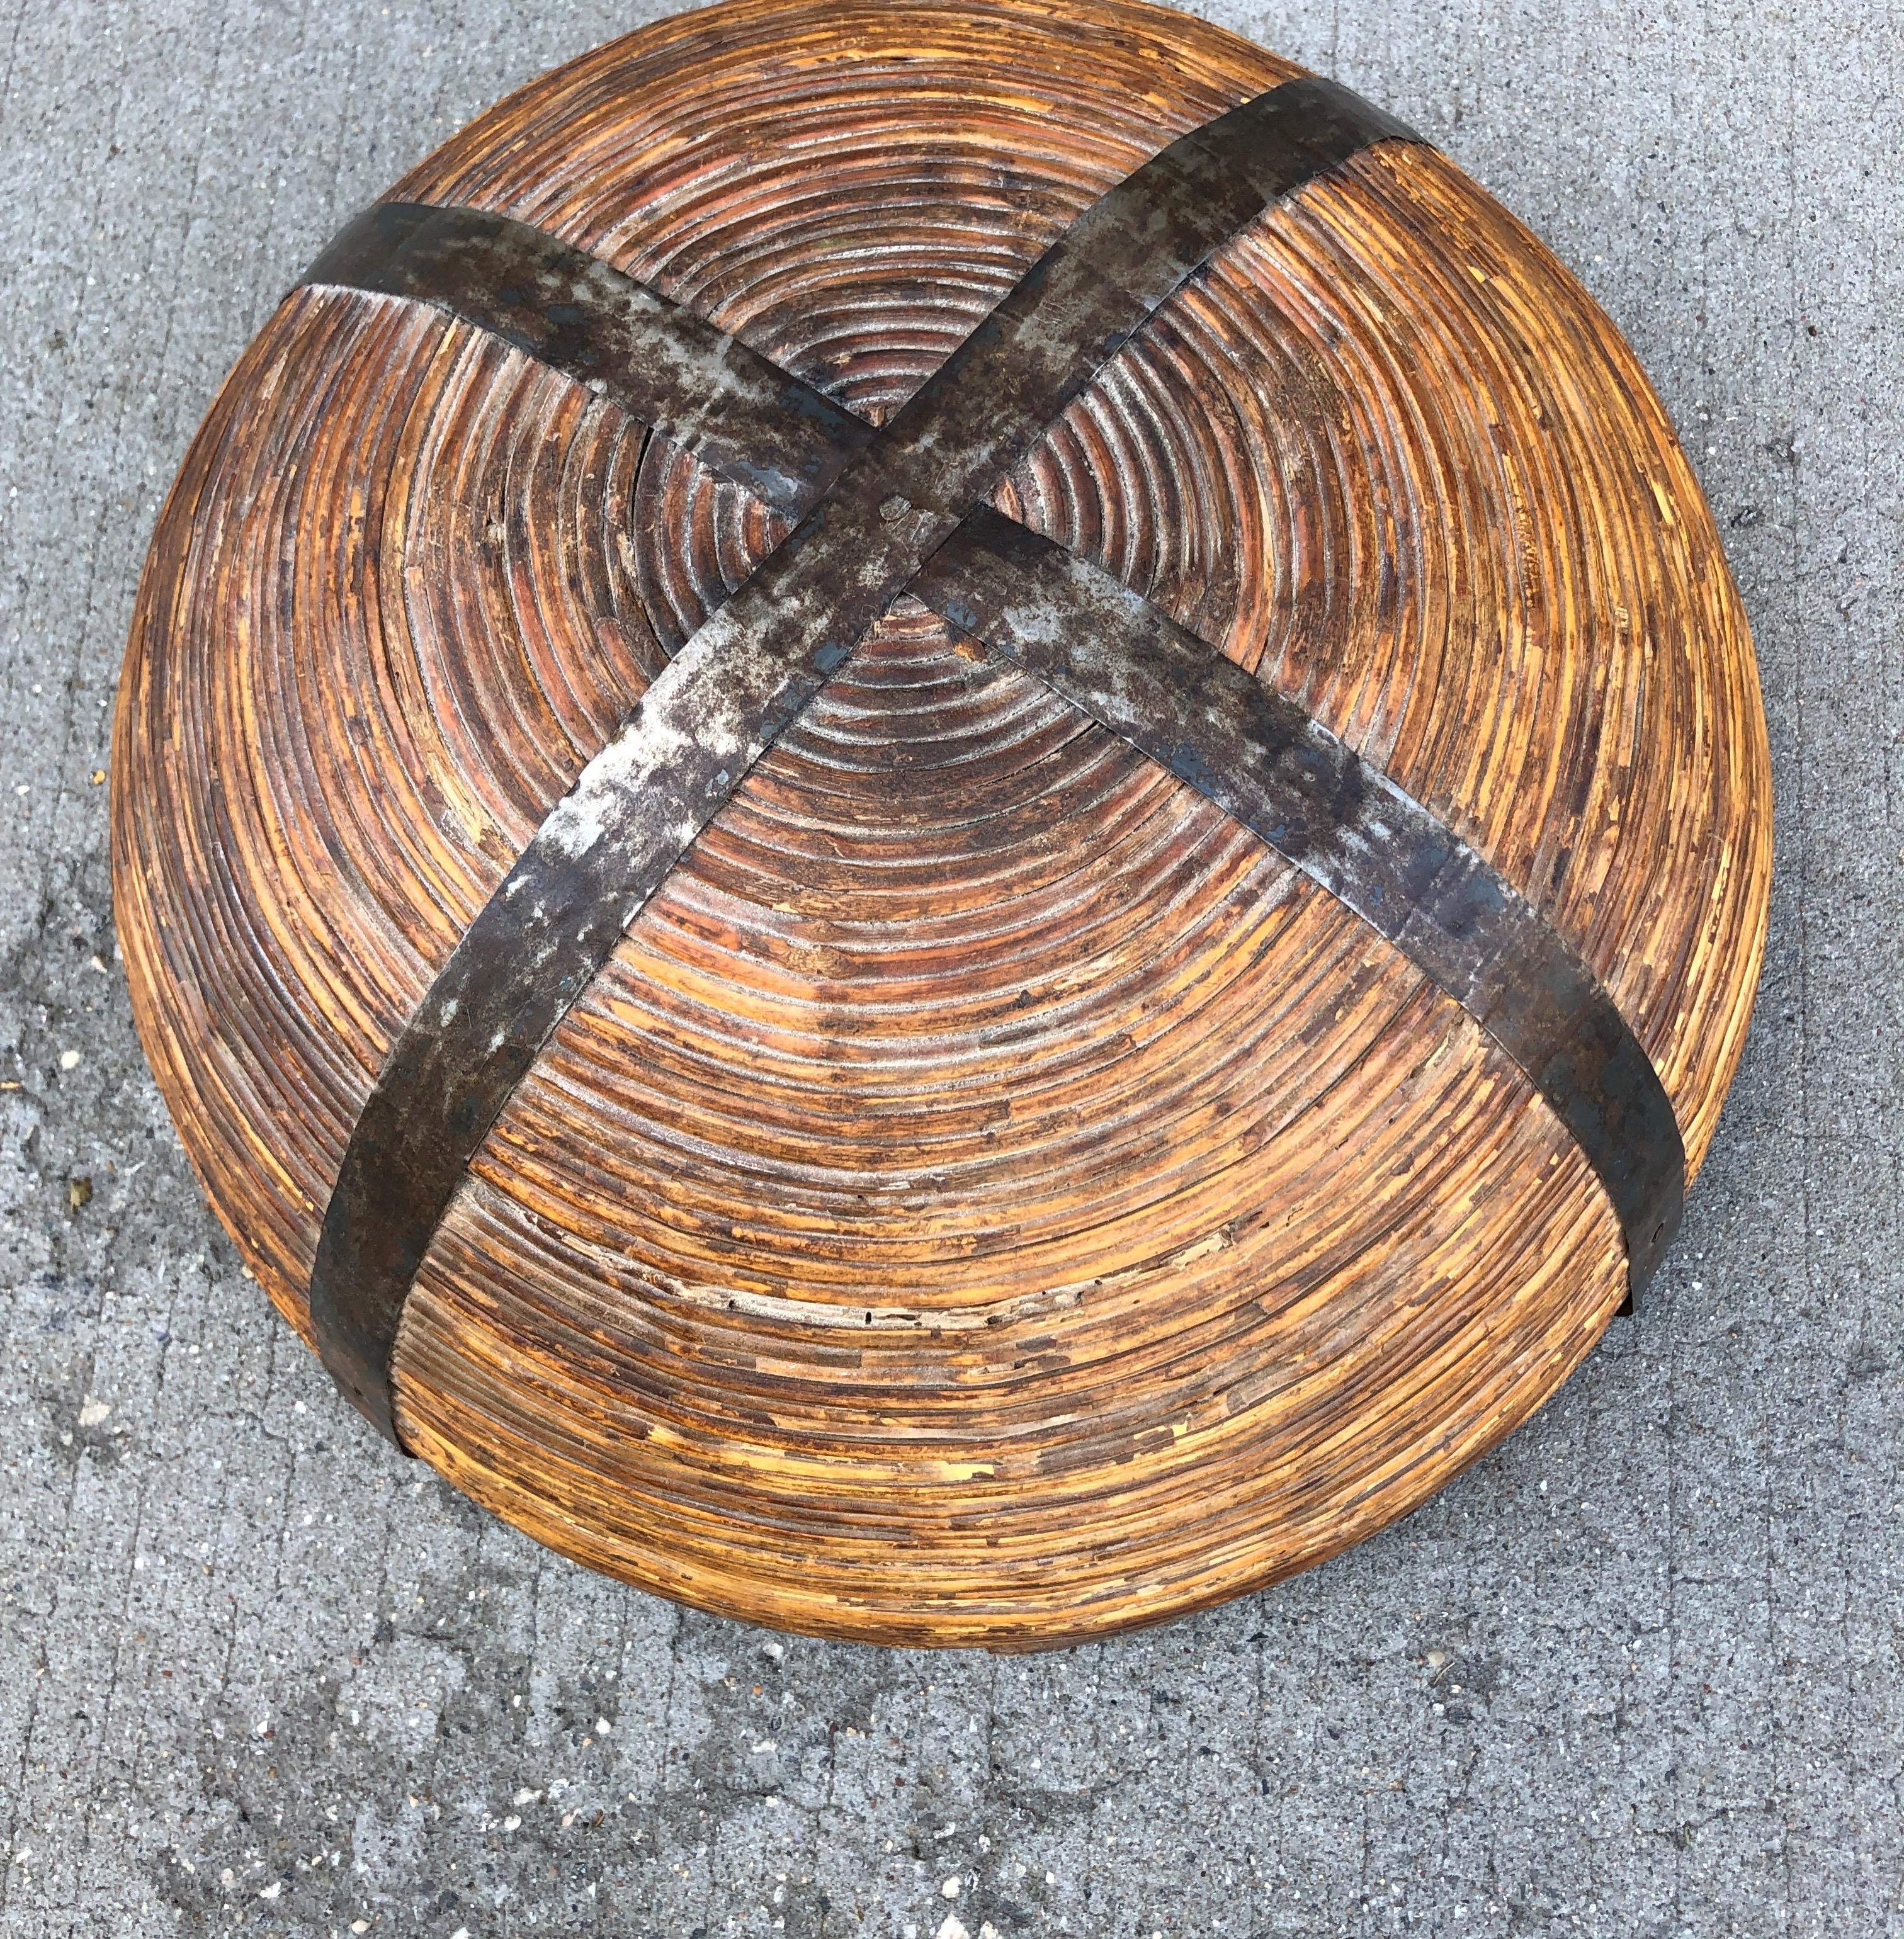 Fiber/Wood Bowl with Metal Supports 10